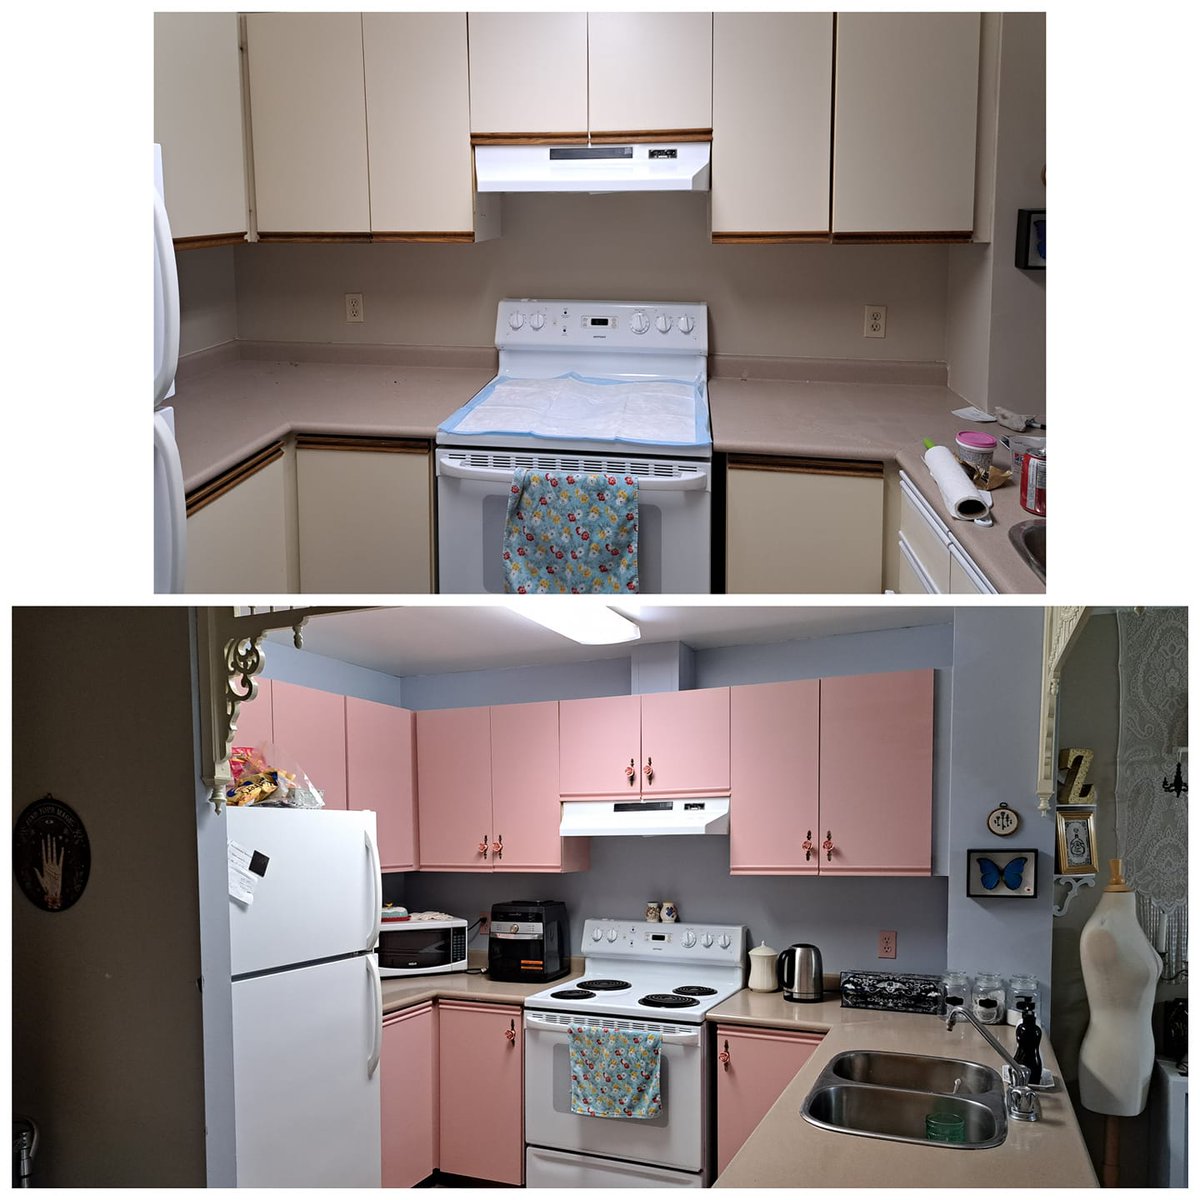 i did a thing. i am so blessed that a friend paid for the paint for me. another friend came to help me paint. and the way the room literally feels so much better now! as a person with chronic depression this is huge #kitchenreno #diyreno #kitchendecor #kitchen #diykitchenreno